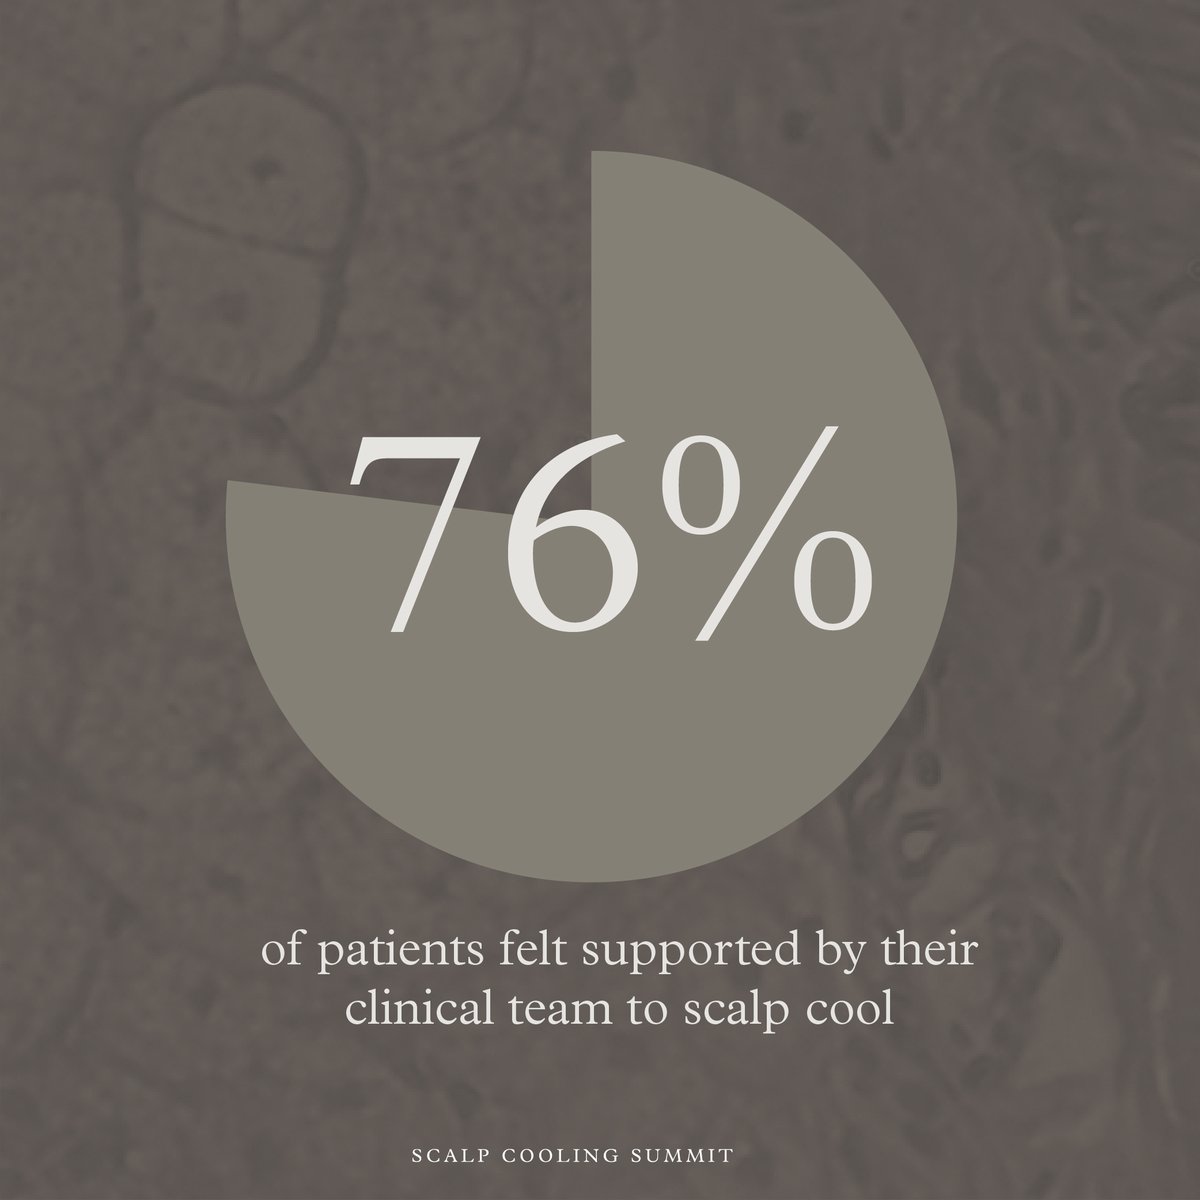 The significance of well-established #scalpcooling protocols took center stage in Summit conversations.

#SinceTheSummit, a remarkable 79% of patients reported feeling supported in their treatment, emphasizing the impact these protocols can have.

More at: scalpcoolingsummit.com